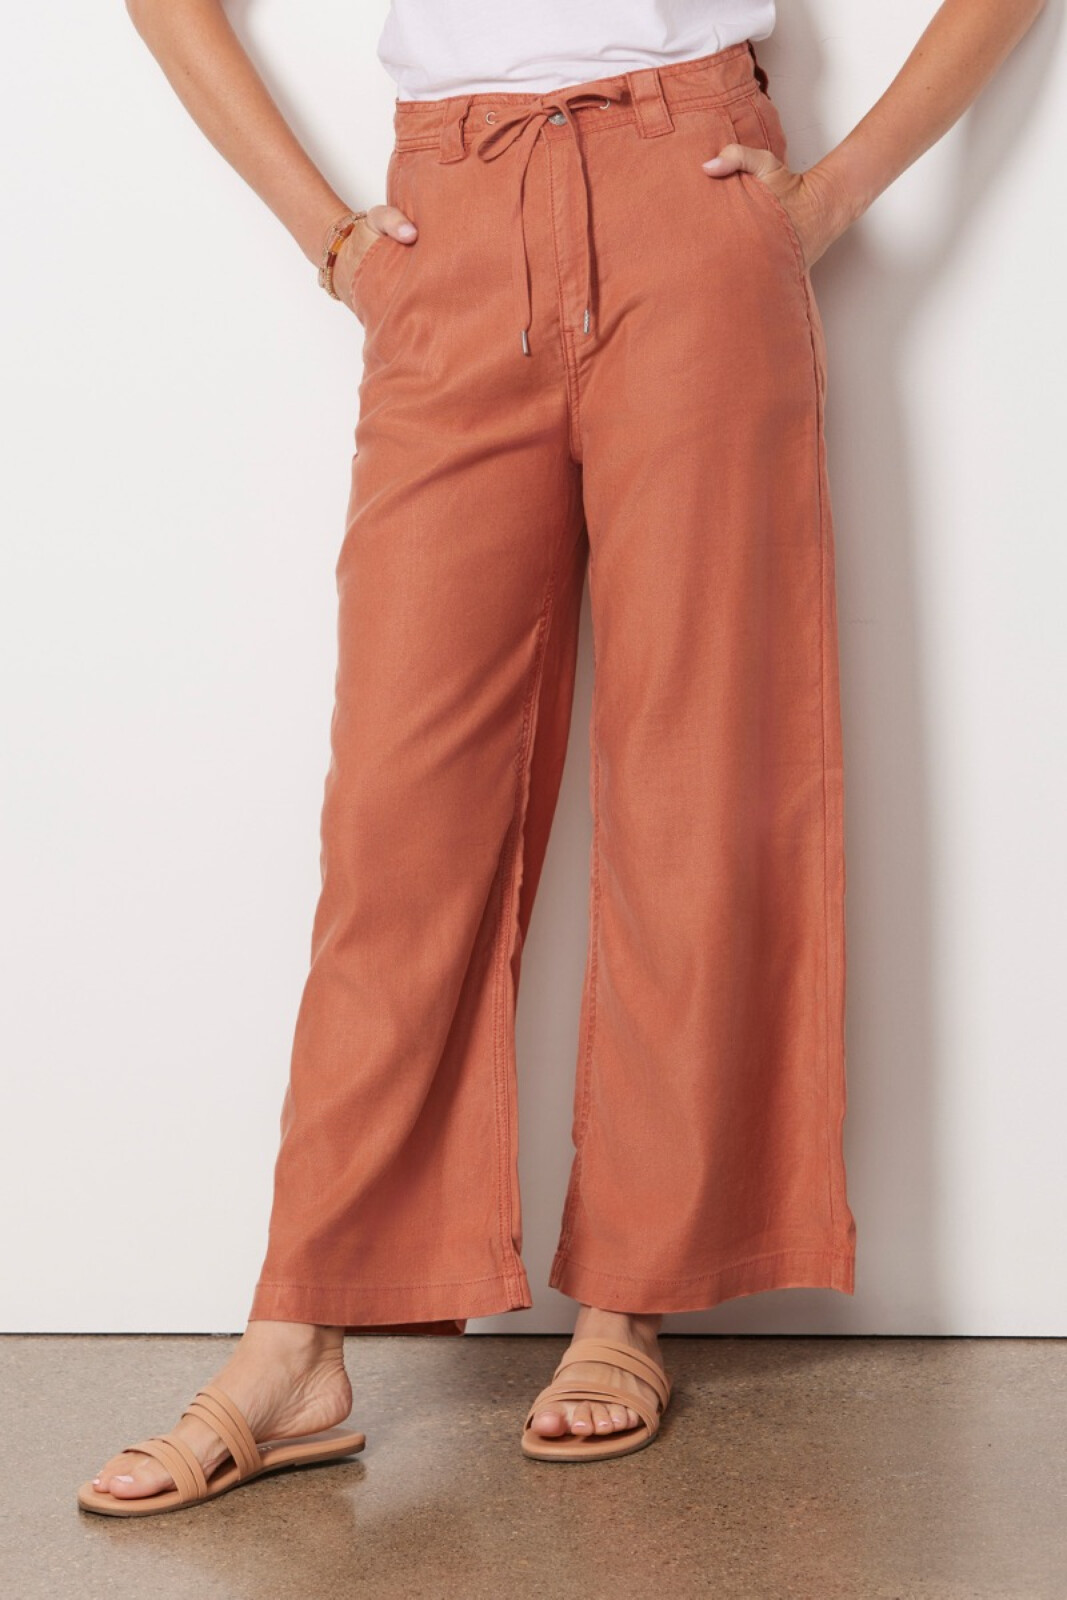 Buy Aerie High Waisted Wide Leg Pant online | American Eagle Outfitters